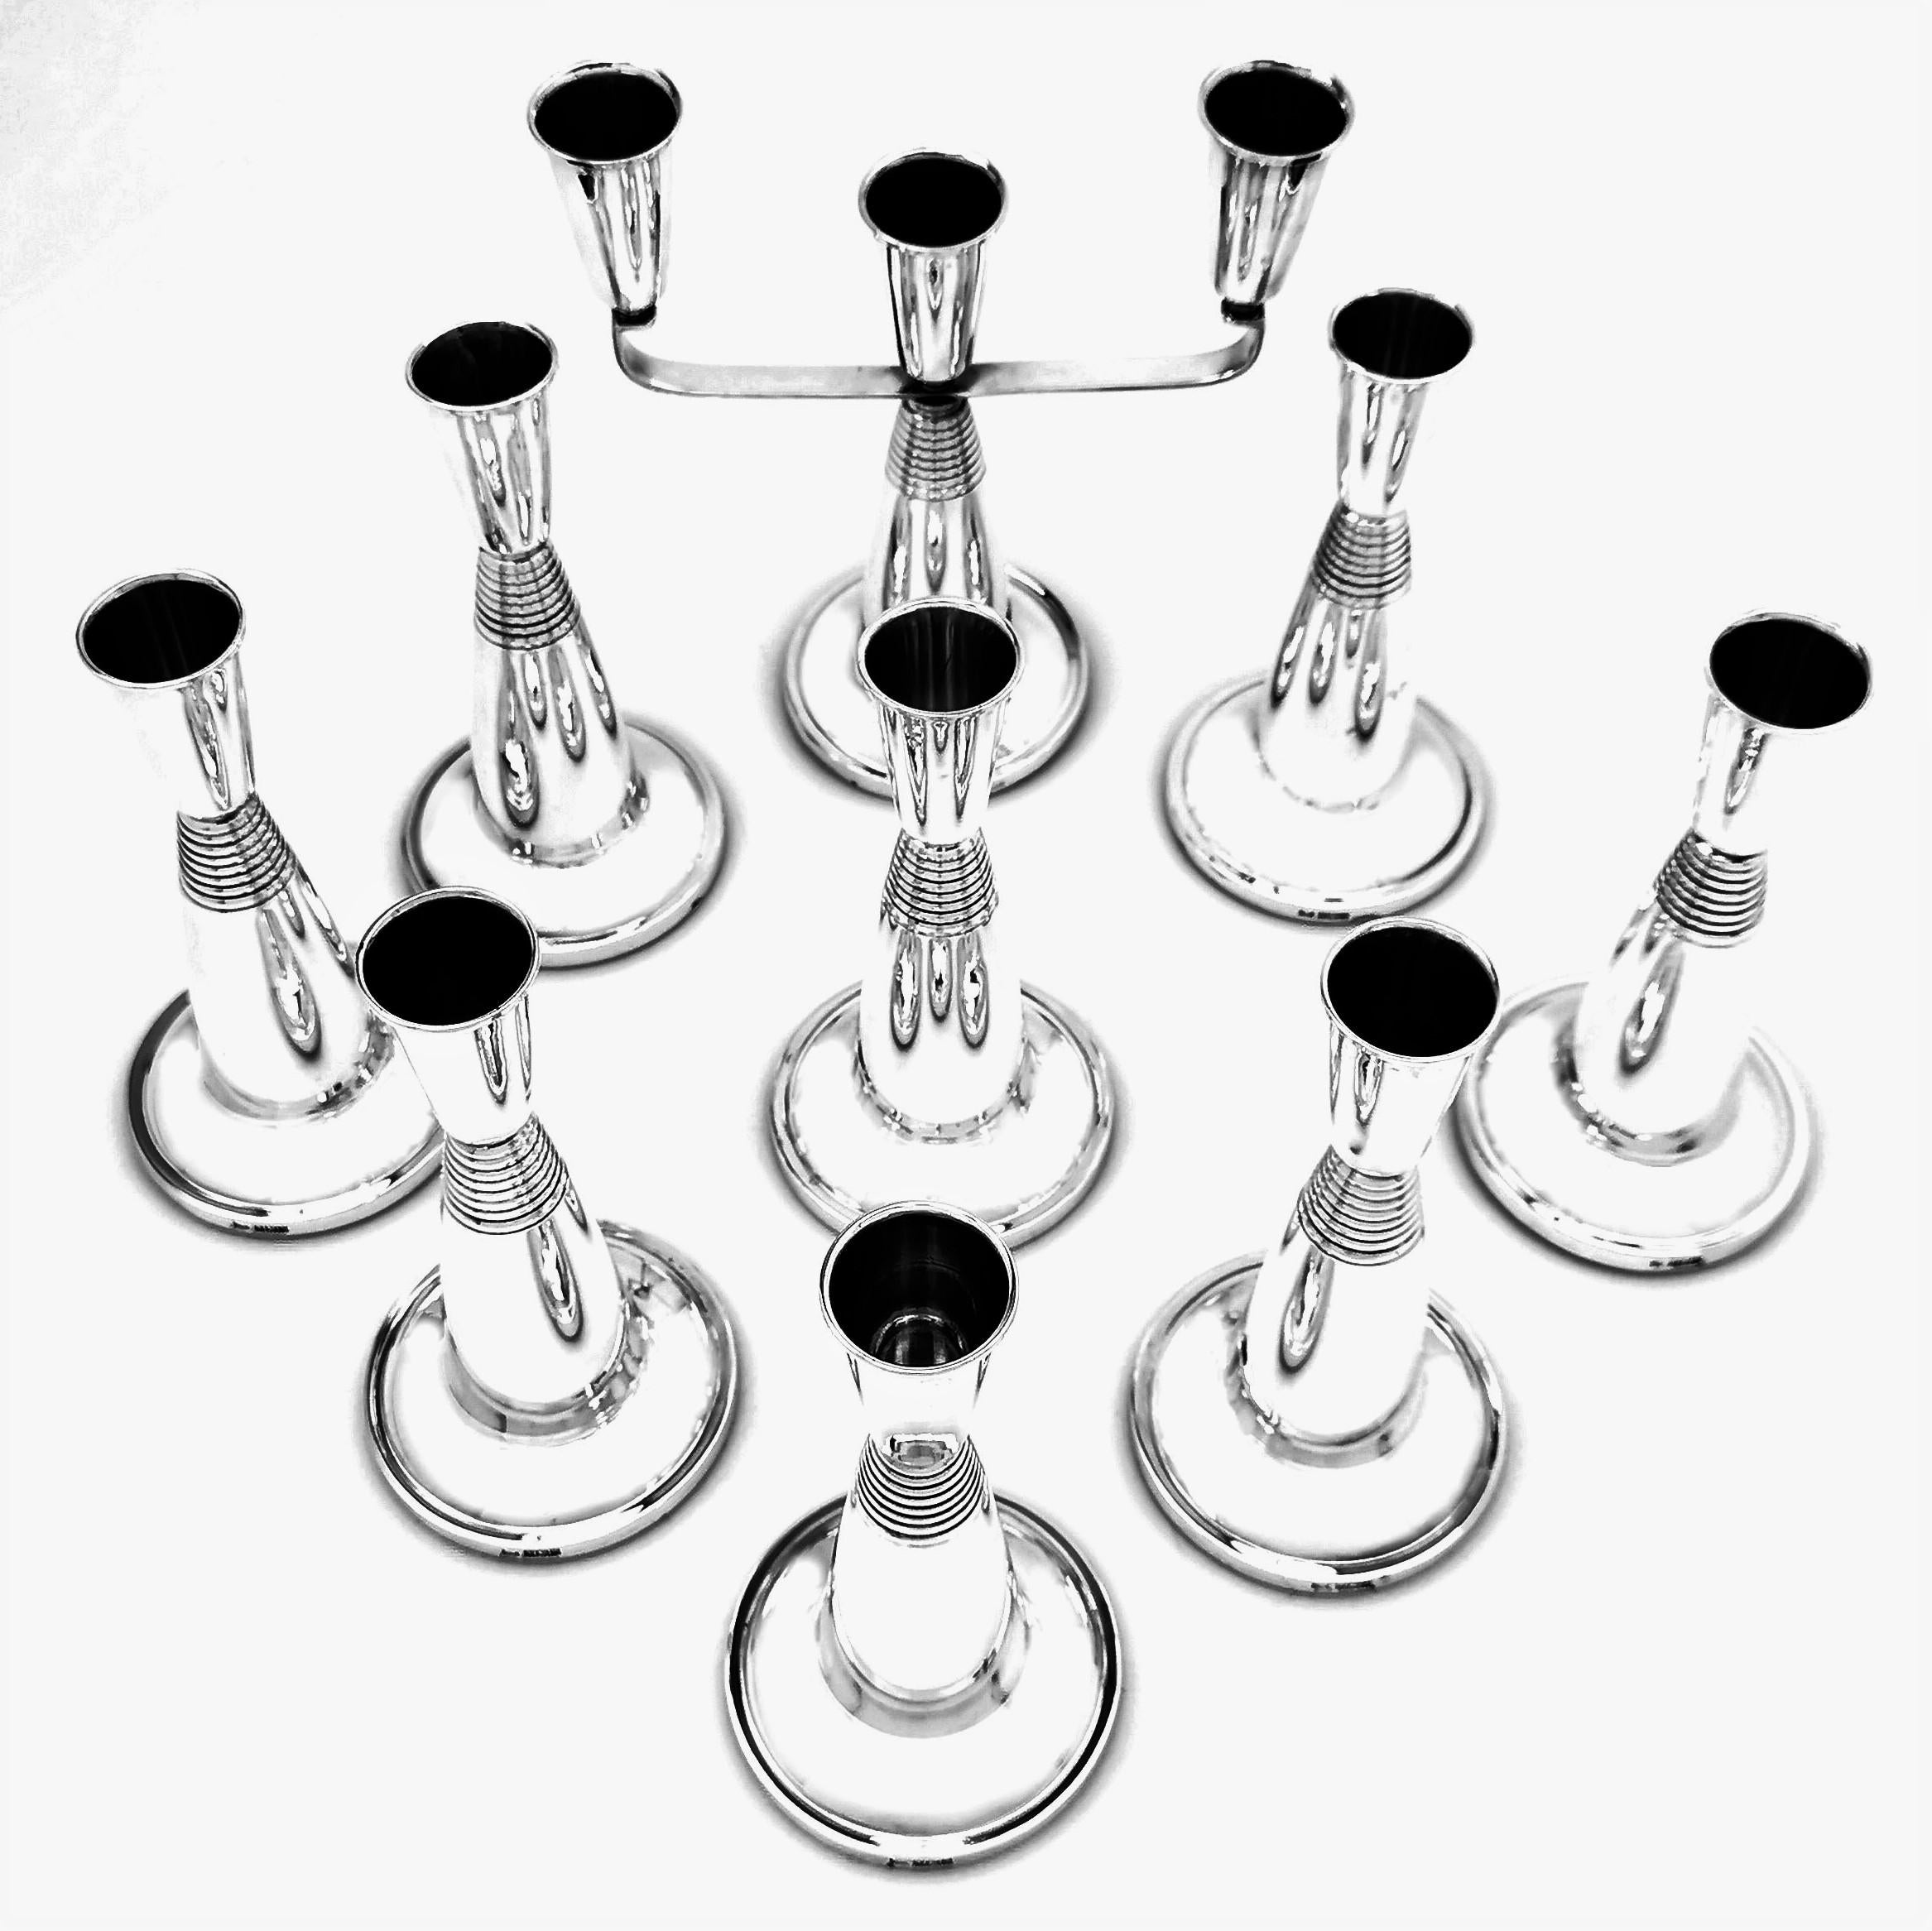 A gorgeous suite of 8 sterling Silver Candlesticks and a matching sterling Silver Candelabrum in a modern Art Deco style. This set can be used in any number of combinations making them very versatile in any space.

Made in Birmingham, UK in 1990 by